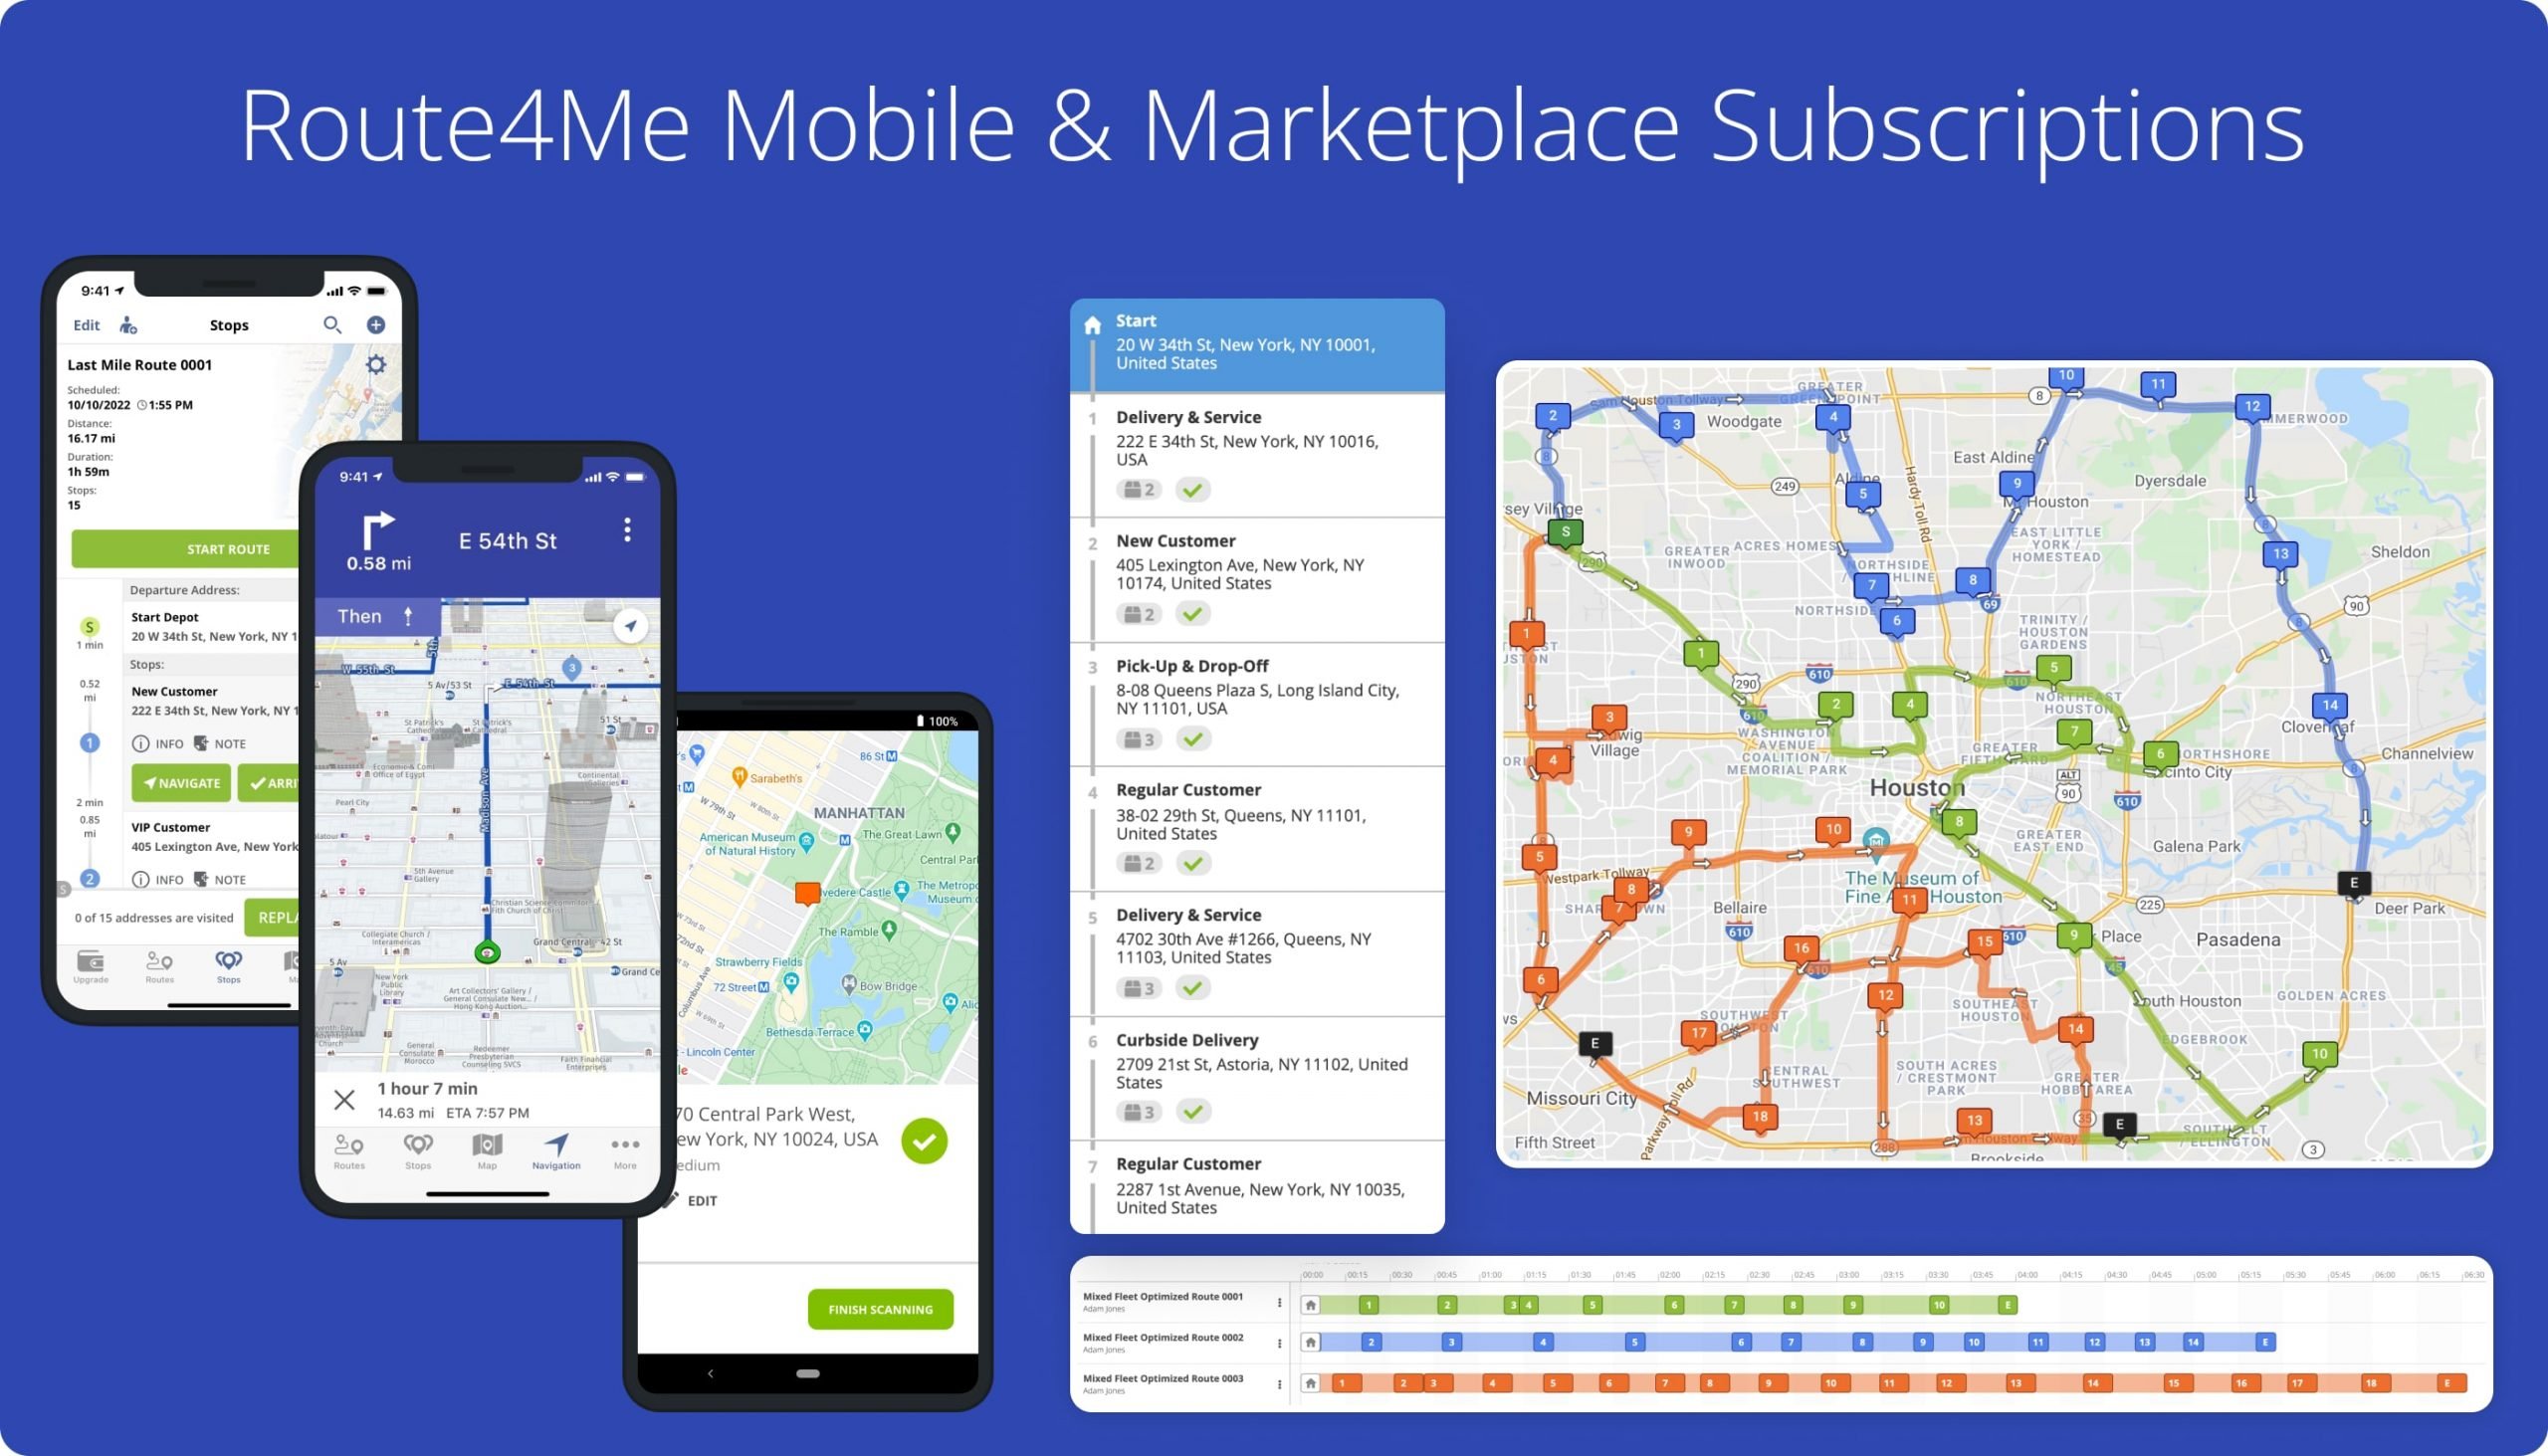 The difference between Route4Me's Mobile Subscriptions vs Marketplace Subscriptions.